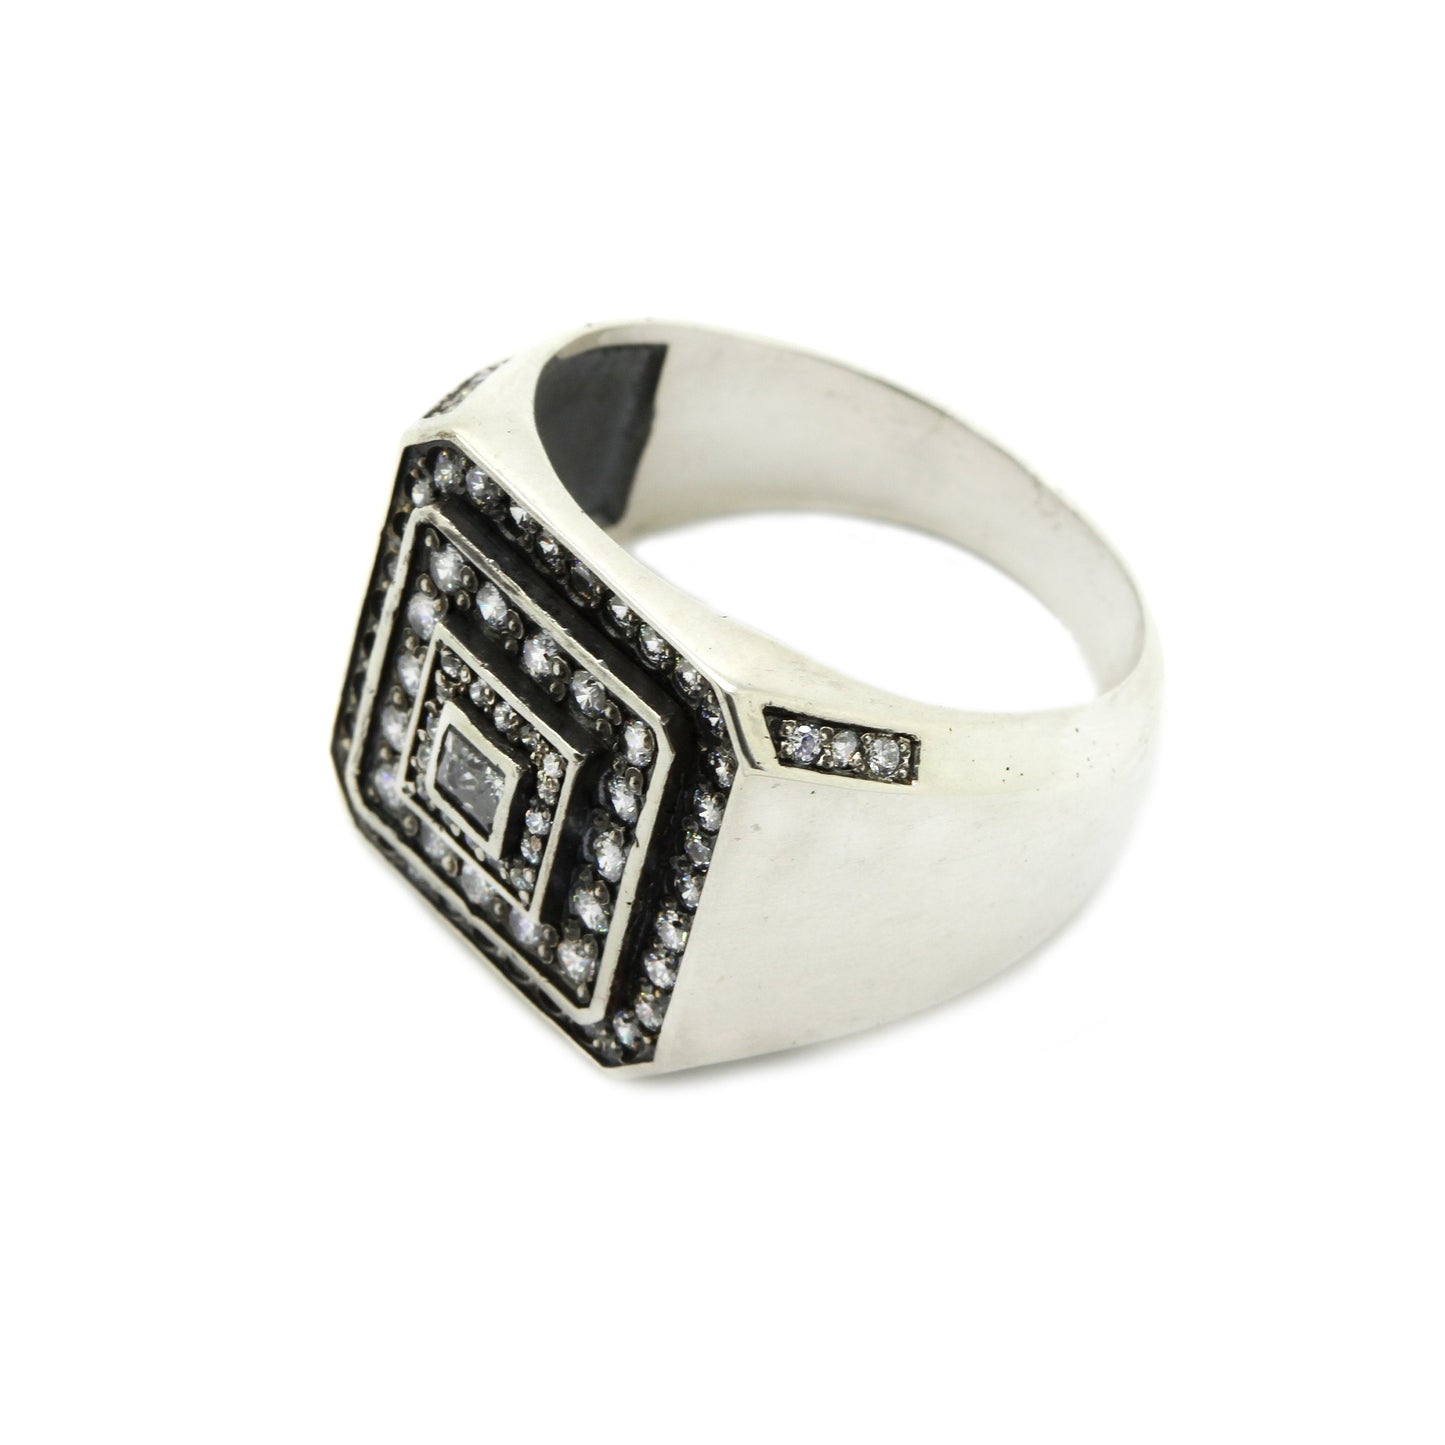 Beautiful Men's Ring Silver 925 with Zircons